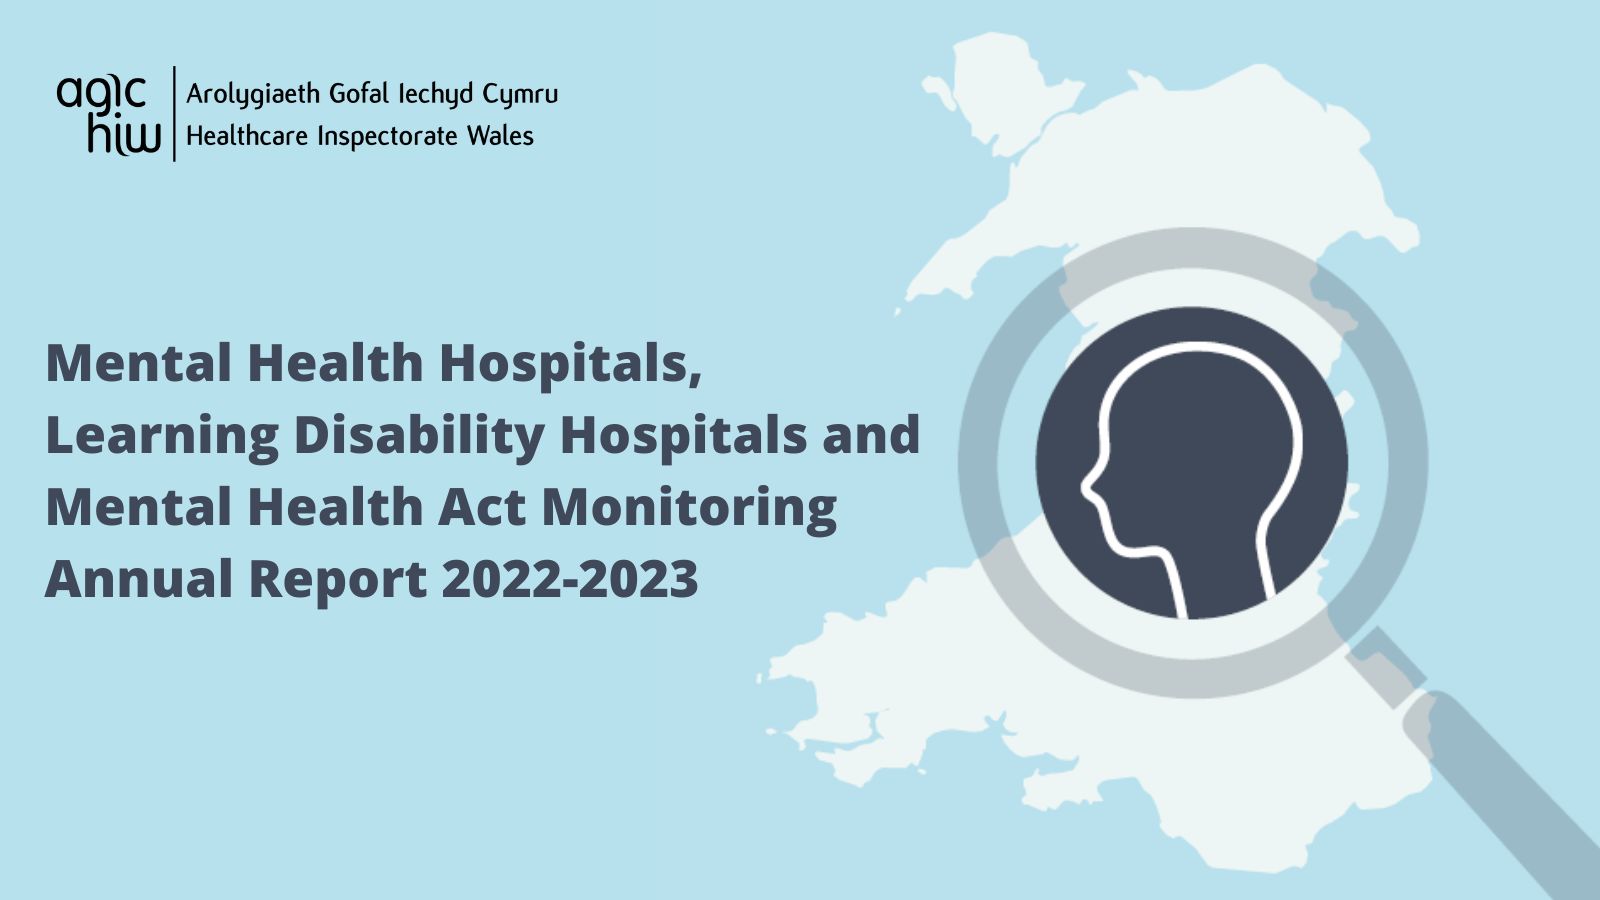 Mental Health Hospitals, Learning Disability Hospitals and Mental Health Act Monitoring Annual Report 2022-2023